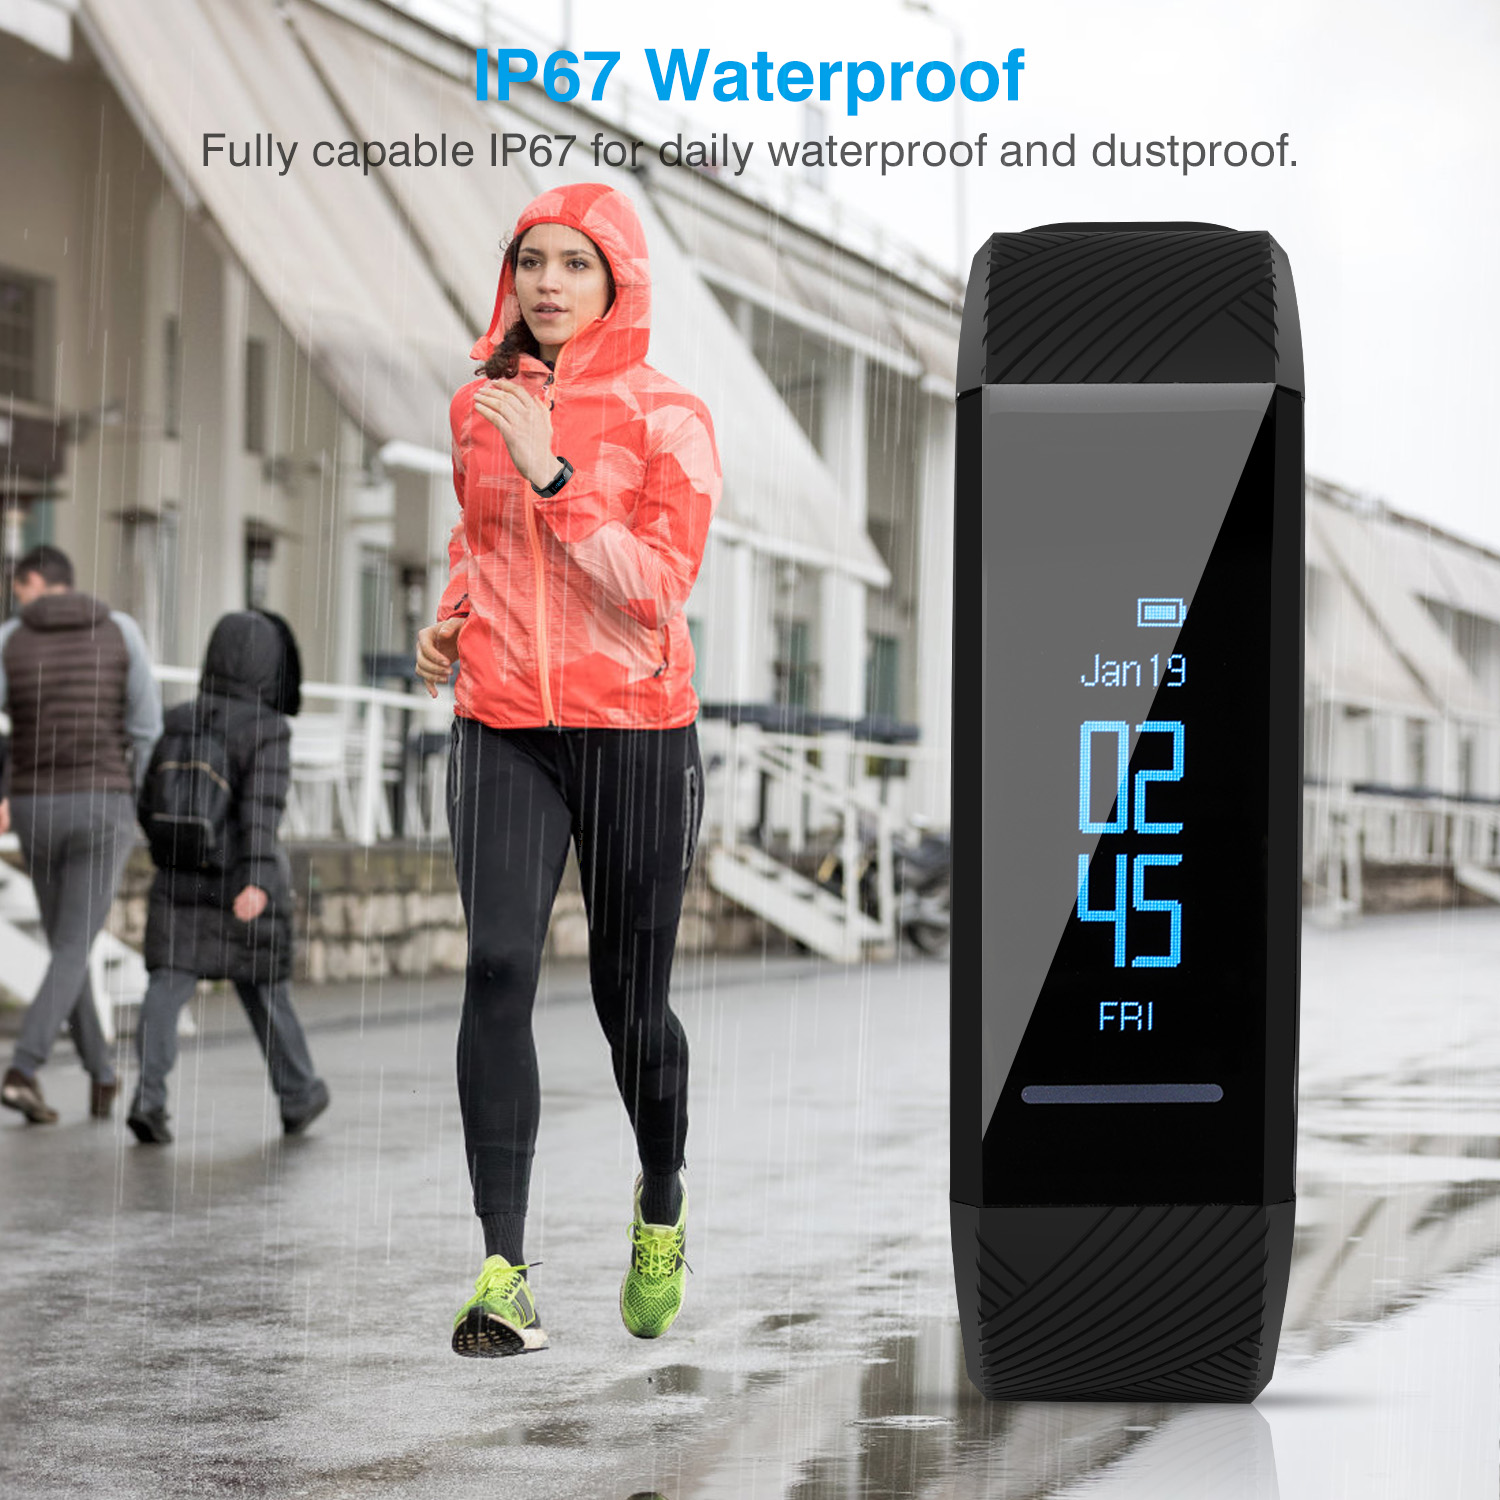 ELEGIANT C11 0.87inch Smart Watch Waterproof bluetooth USB Rechargeable Touch Fitness Tracker 3 Sport Modes Wristband